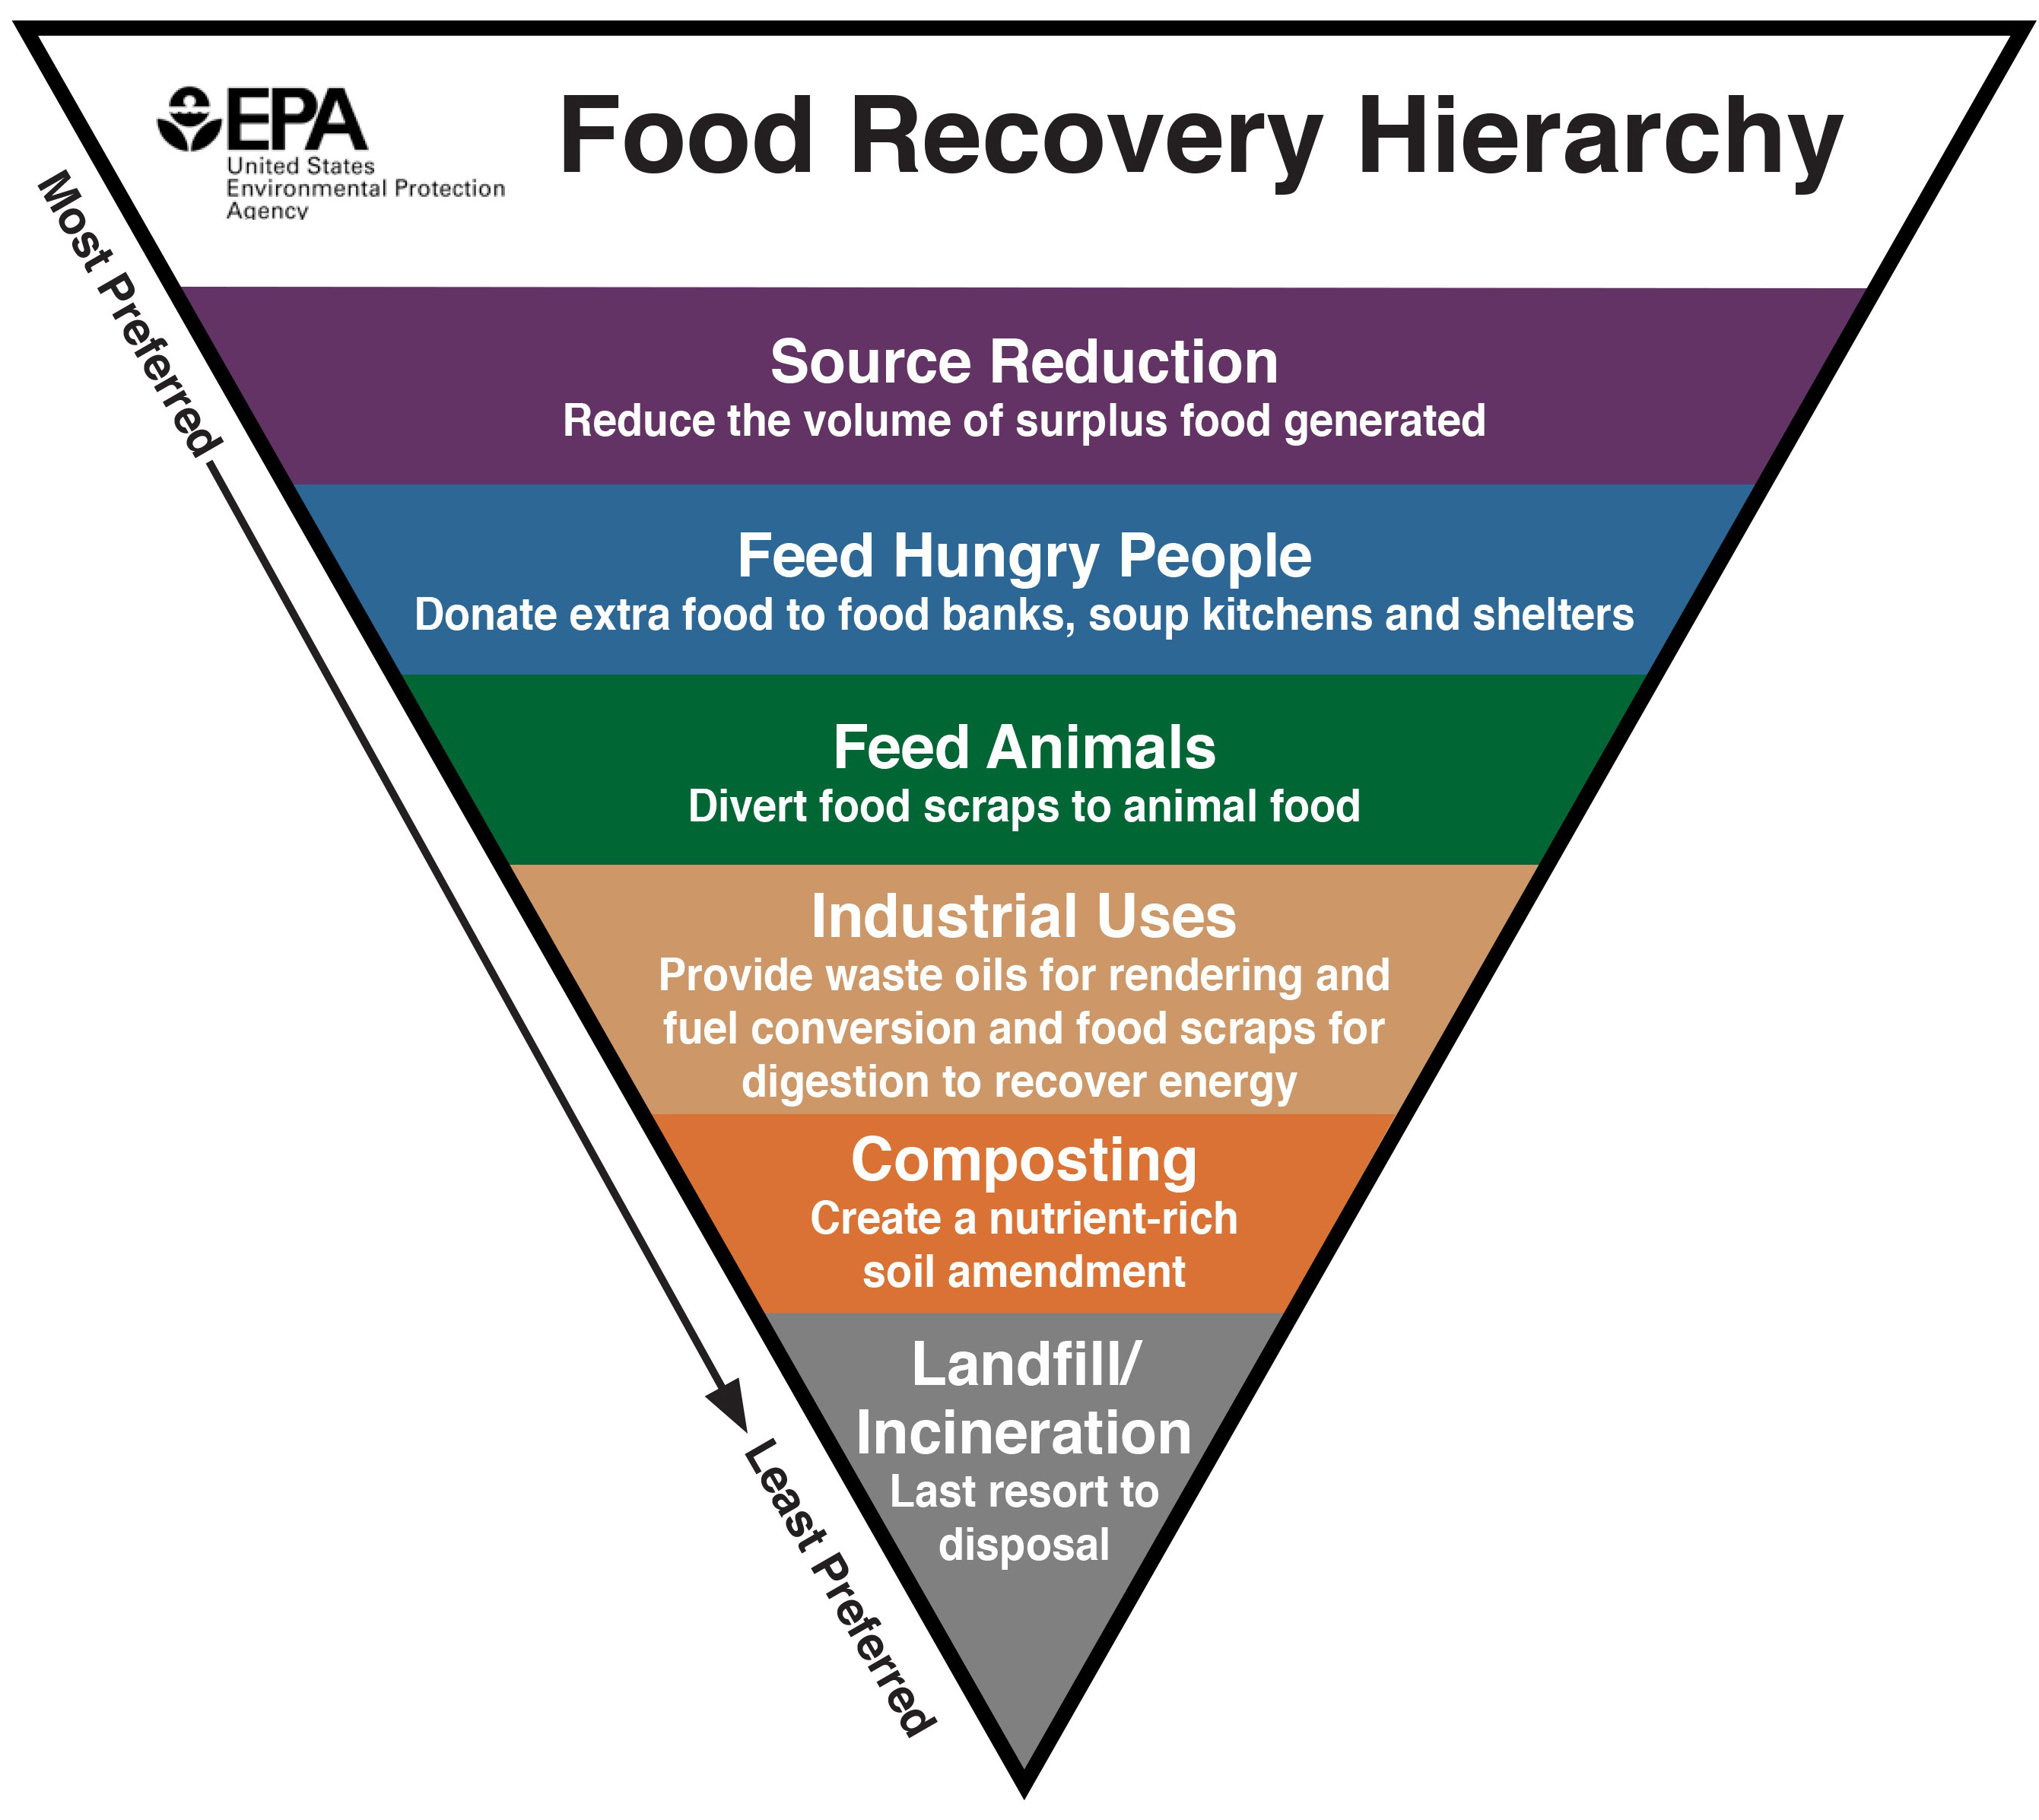 Diagram showing the food recovery hierarchy, with actions from most preferred (source reduction) to least preferred (landfill/incineration) as ways to deal with food waste.